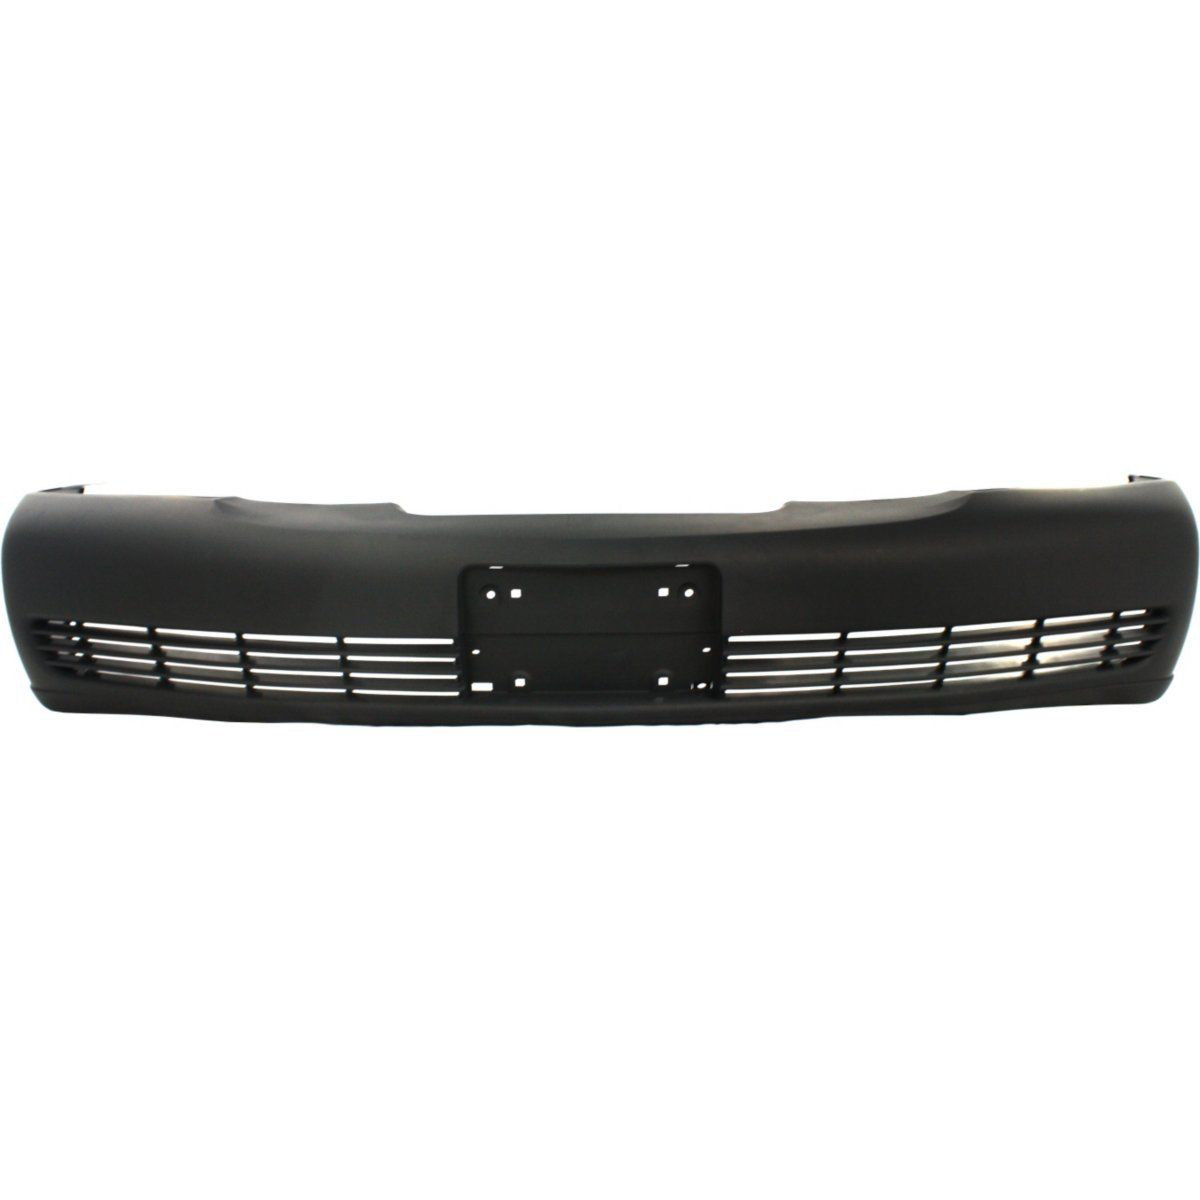 2000-2005 CADILLAC DEVILLE Front Bumper Cover base Luxury  w/o Fog Lamps Painted to Match